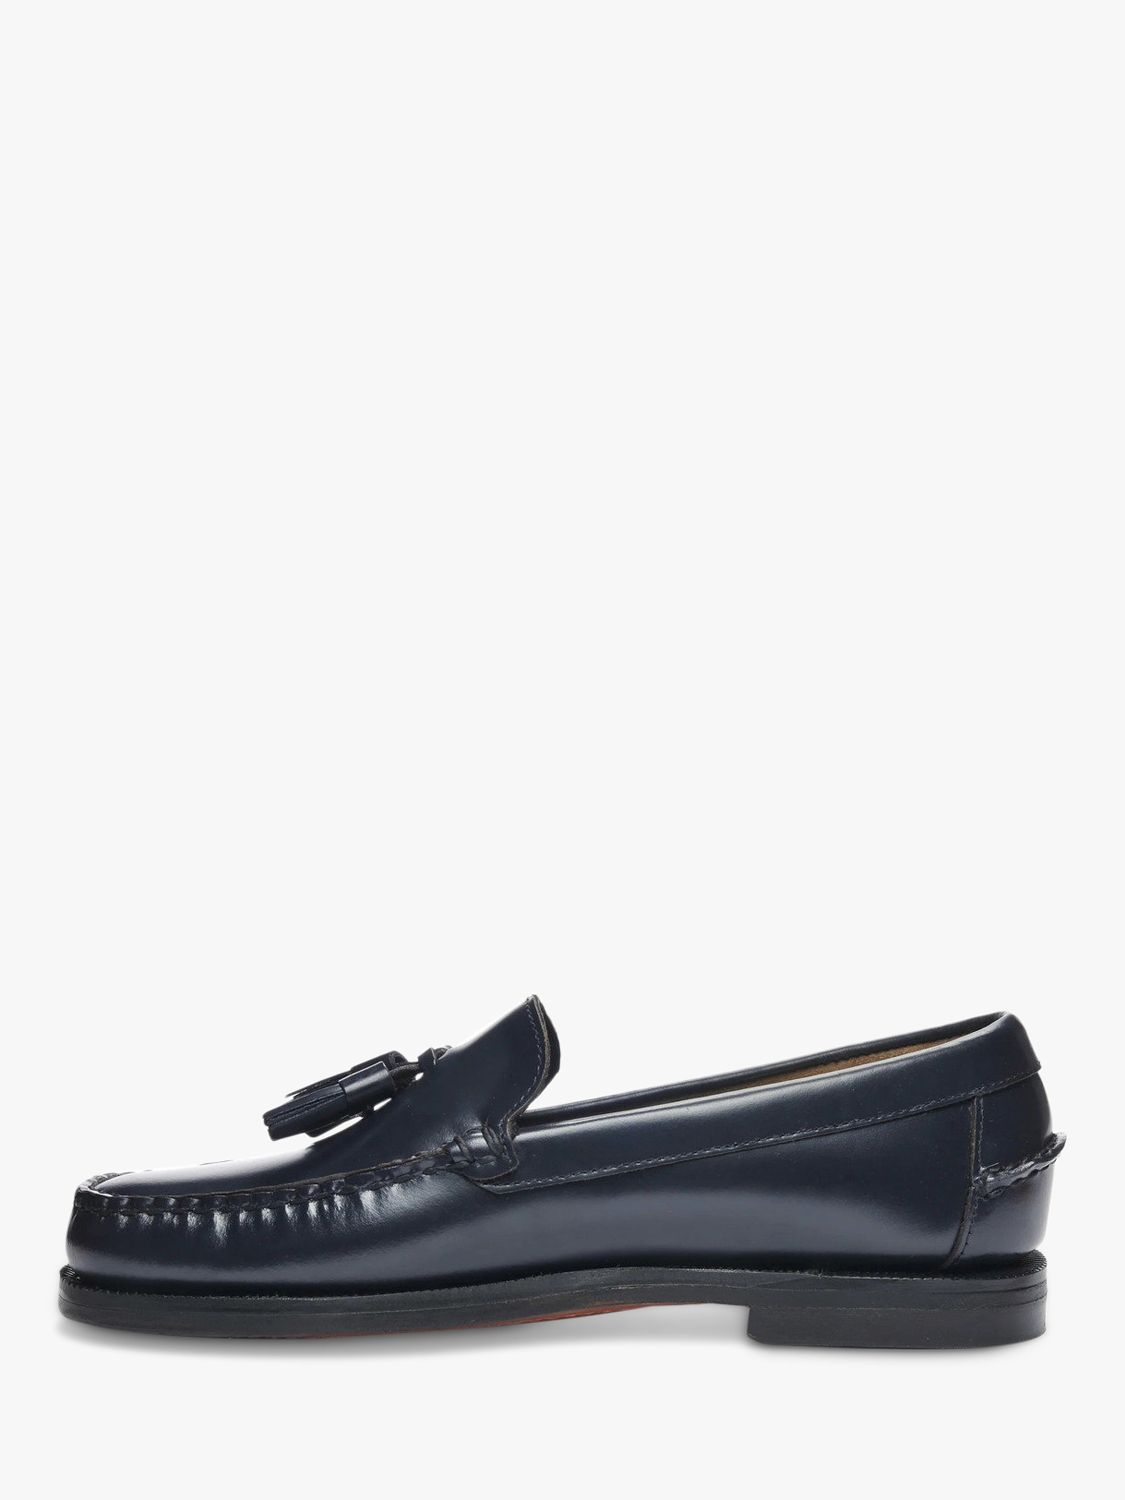 Sebago Classic Will Loafers, Navy at John Lewis & Partners